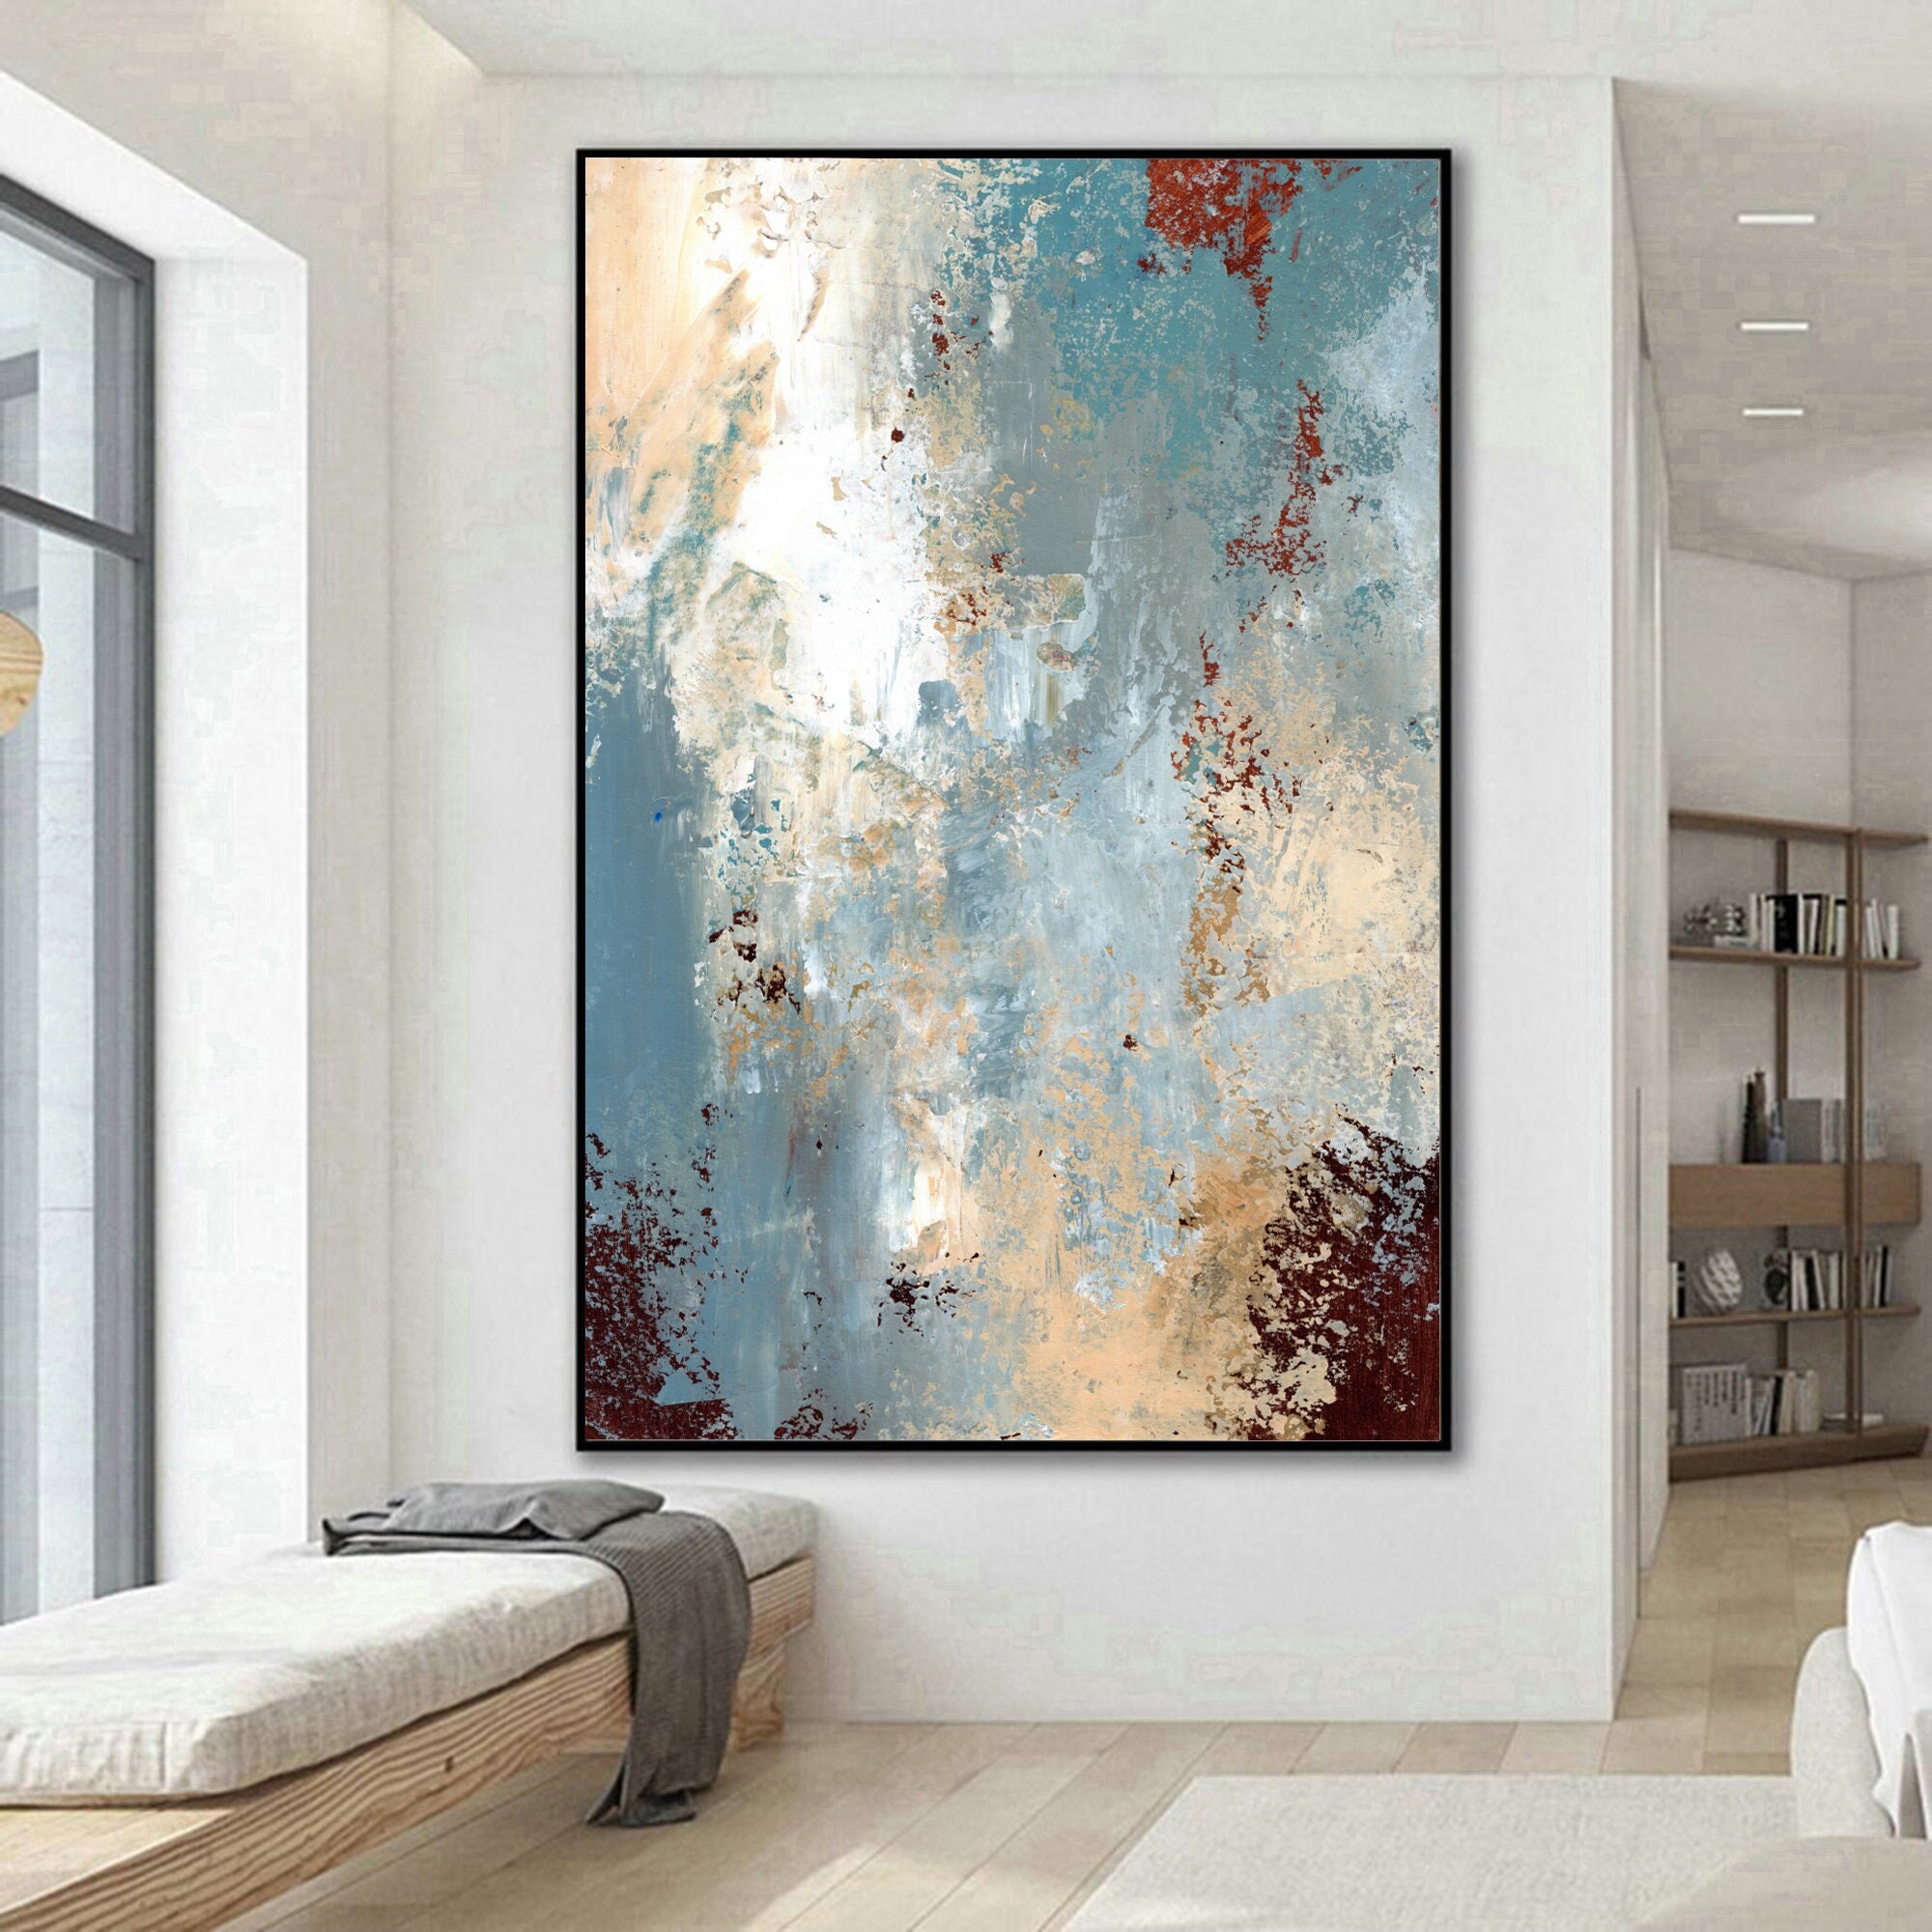 How to Create a Modern and Minimalist Home with Abstract Canvas Wall Art?, by Wallartaccents